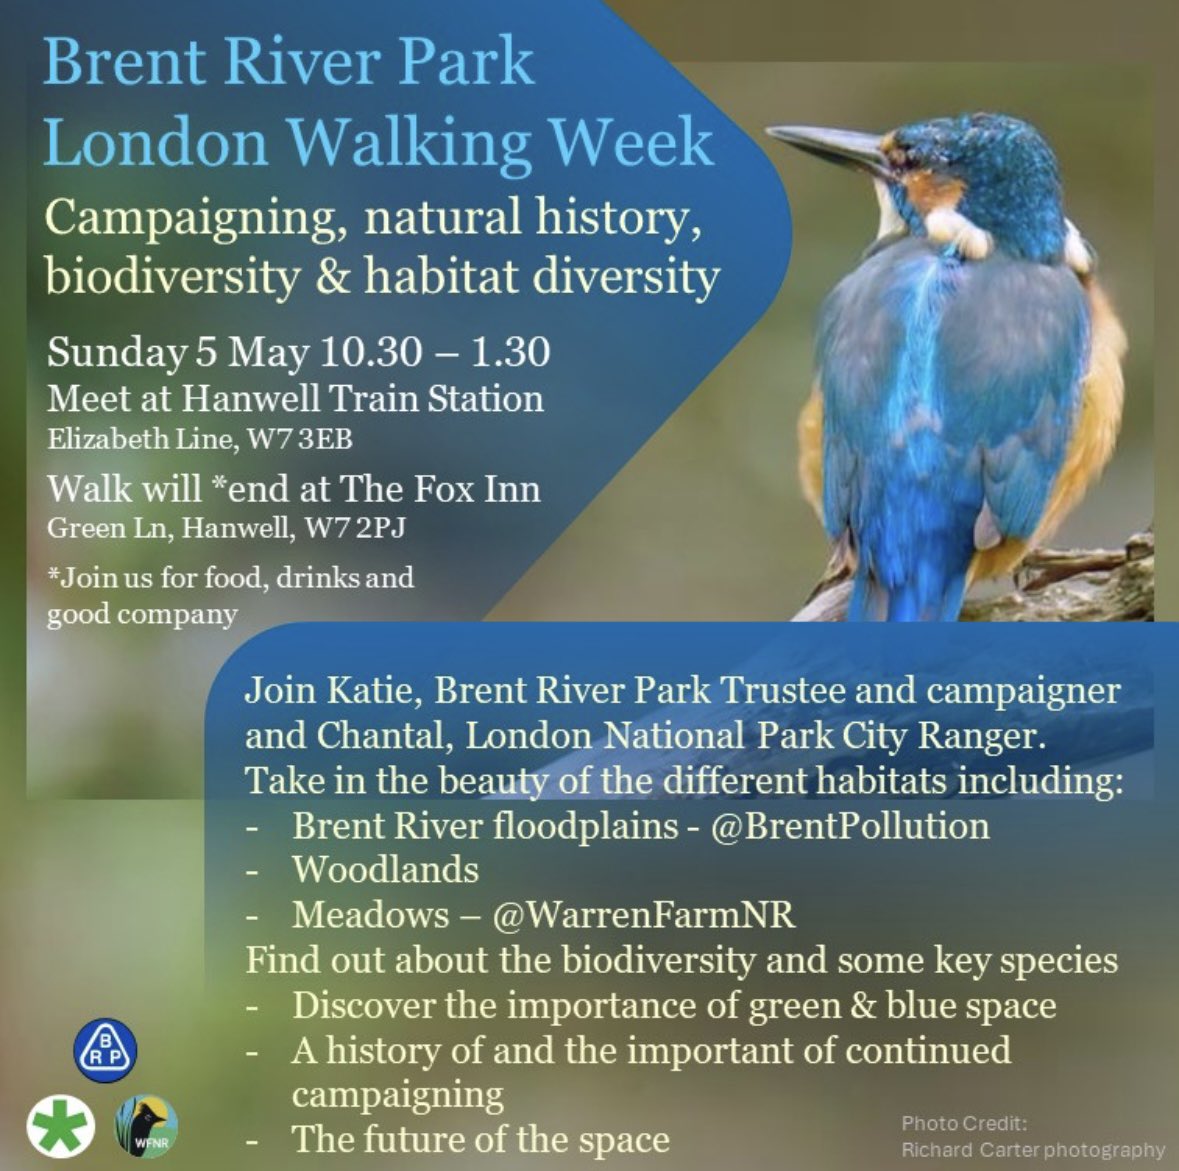 Excited to be kick-starting @LondonNPC London #walkingweek 🌿Come join us & @WanderfulLdn to find out how 49 years ago our charity campaigned to form the #BrentRiverPark, continuing today with the work of @WarrenFarmNR & @BrentPollution Let’s enjoy urban nature & wellbeing!💙🚶🏼💚